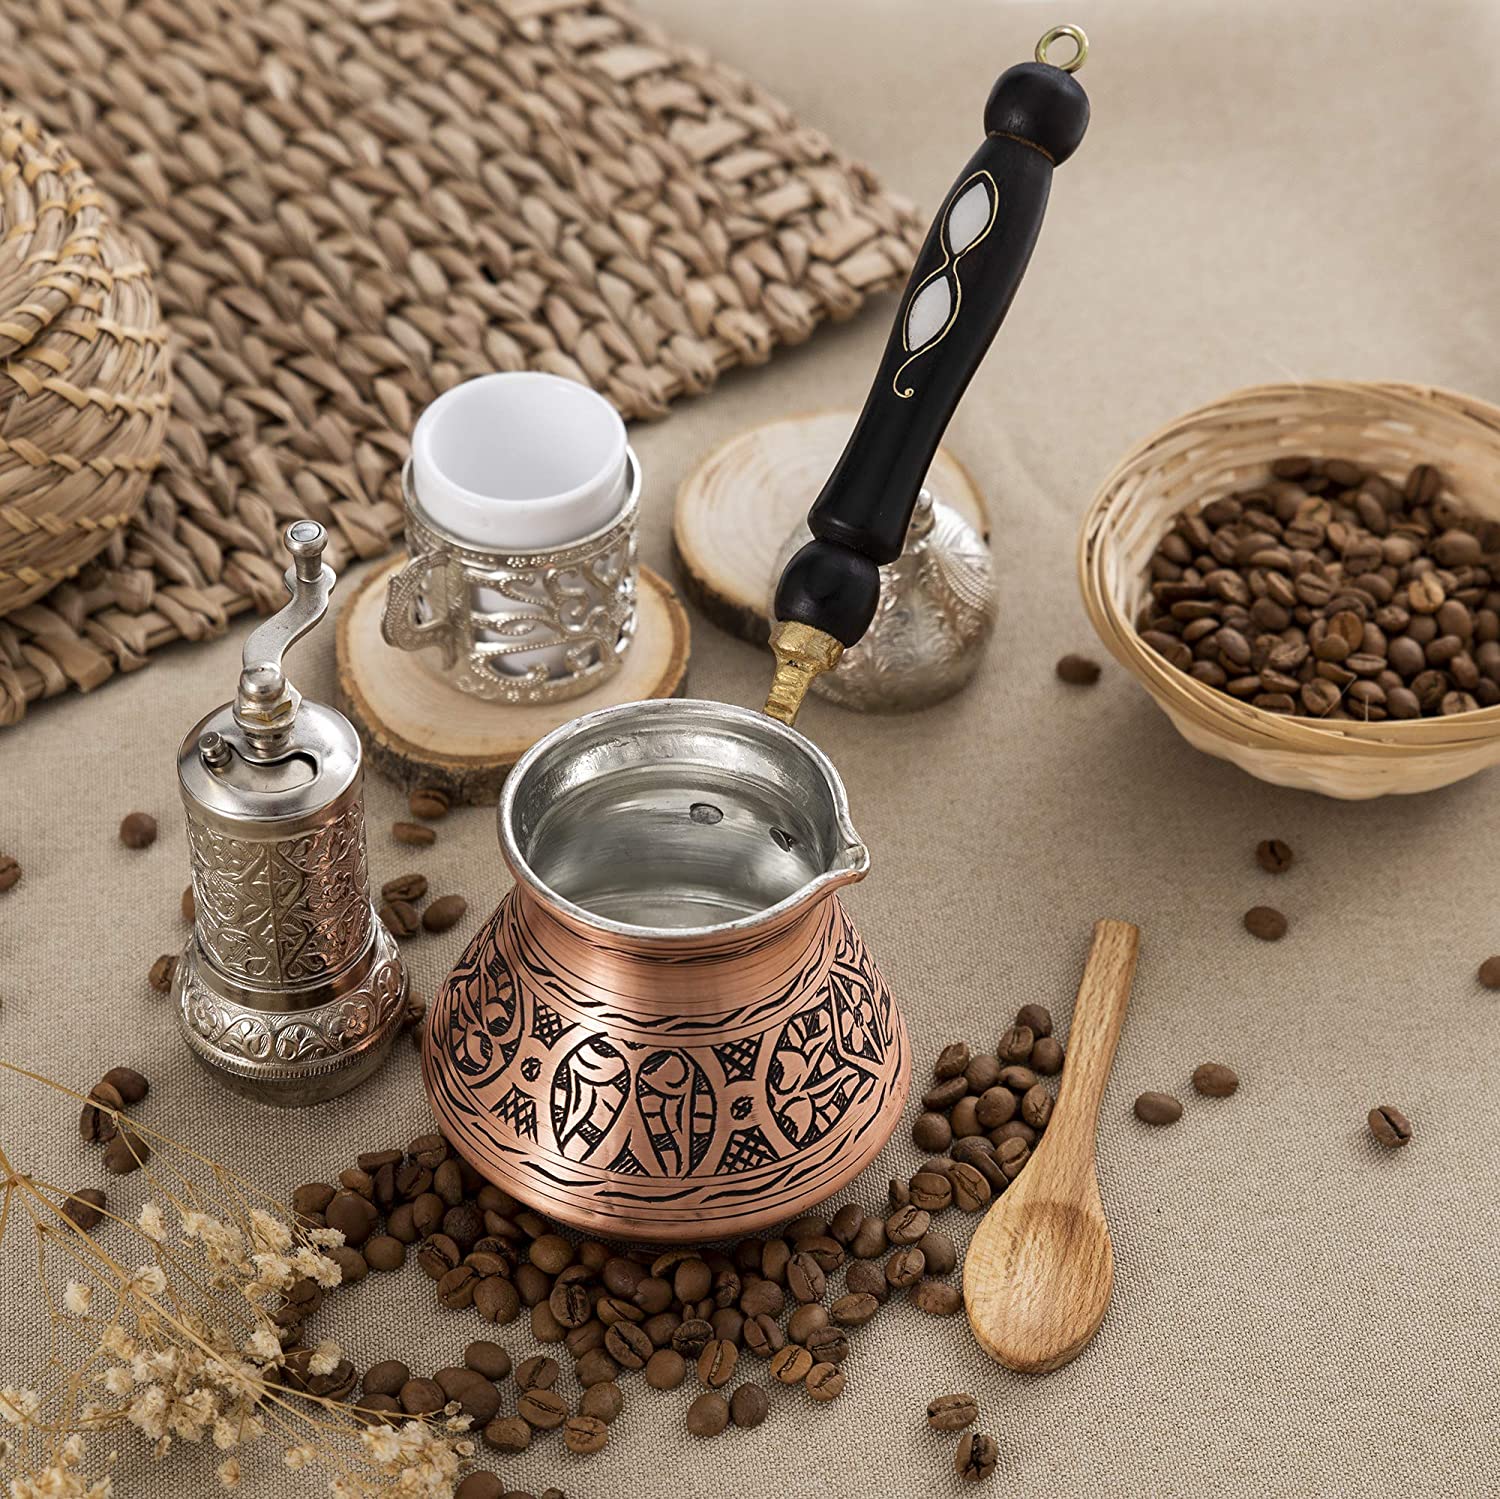 Erbulus 12 Oz Turkish Coffee Pot – Briki Greek, Arabic, Turkish Coffee  Maker with Wooden Handle and Fortune App, 4 persons Hammered Copper Cezve  Ibrik , Stovetop Engraved, Includes Wooden Spoon –